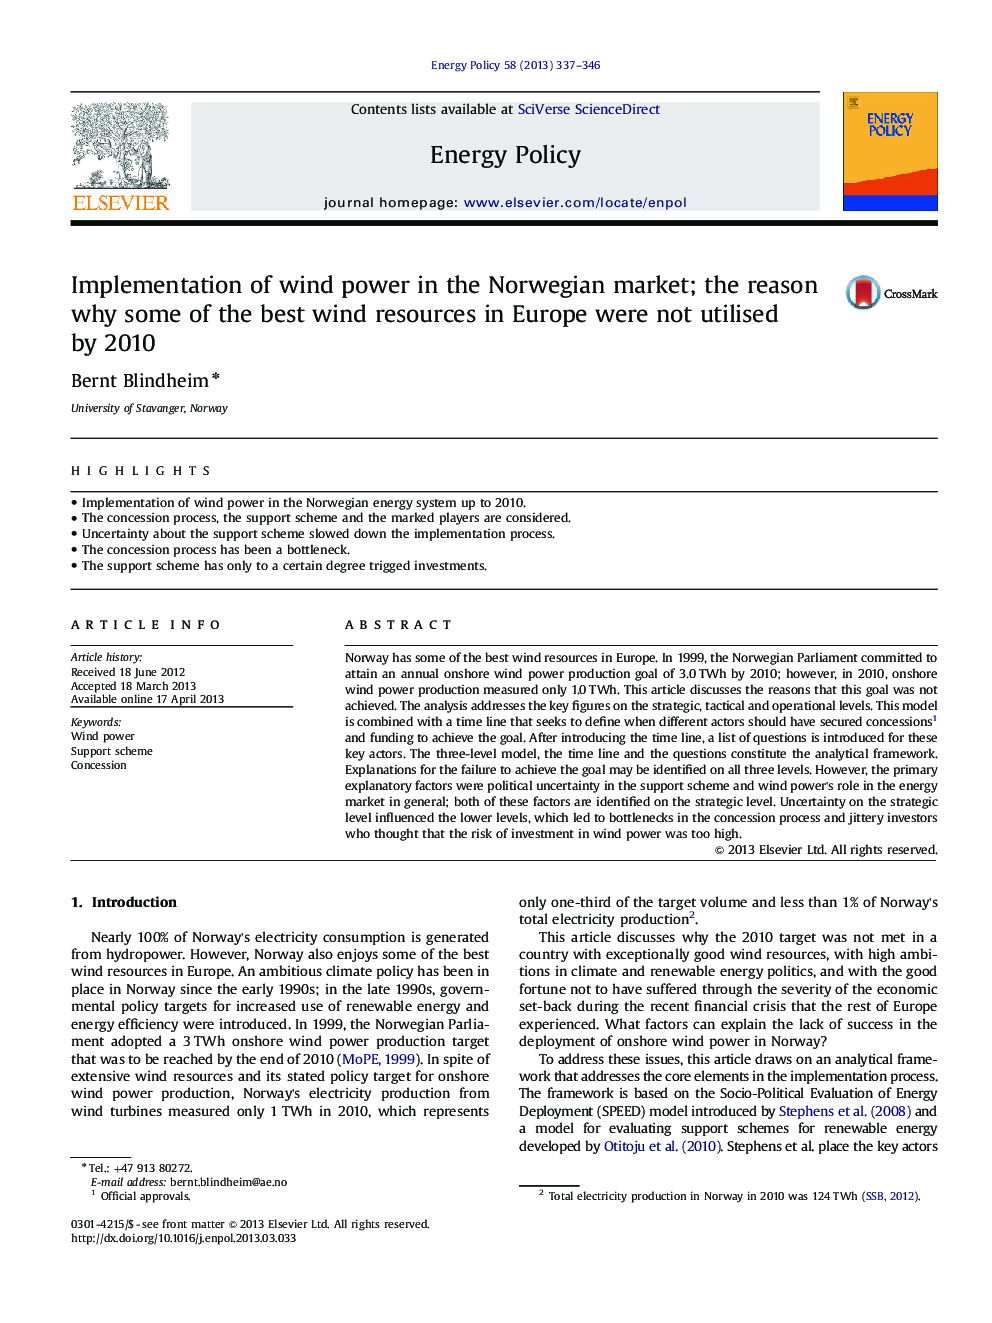 Implementation of wind power in the Norwegian market; the reason why some of the best wind resources in Europe were not utilised by 2010